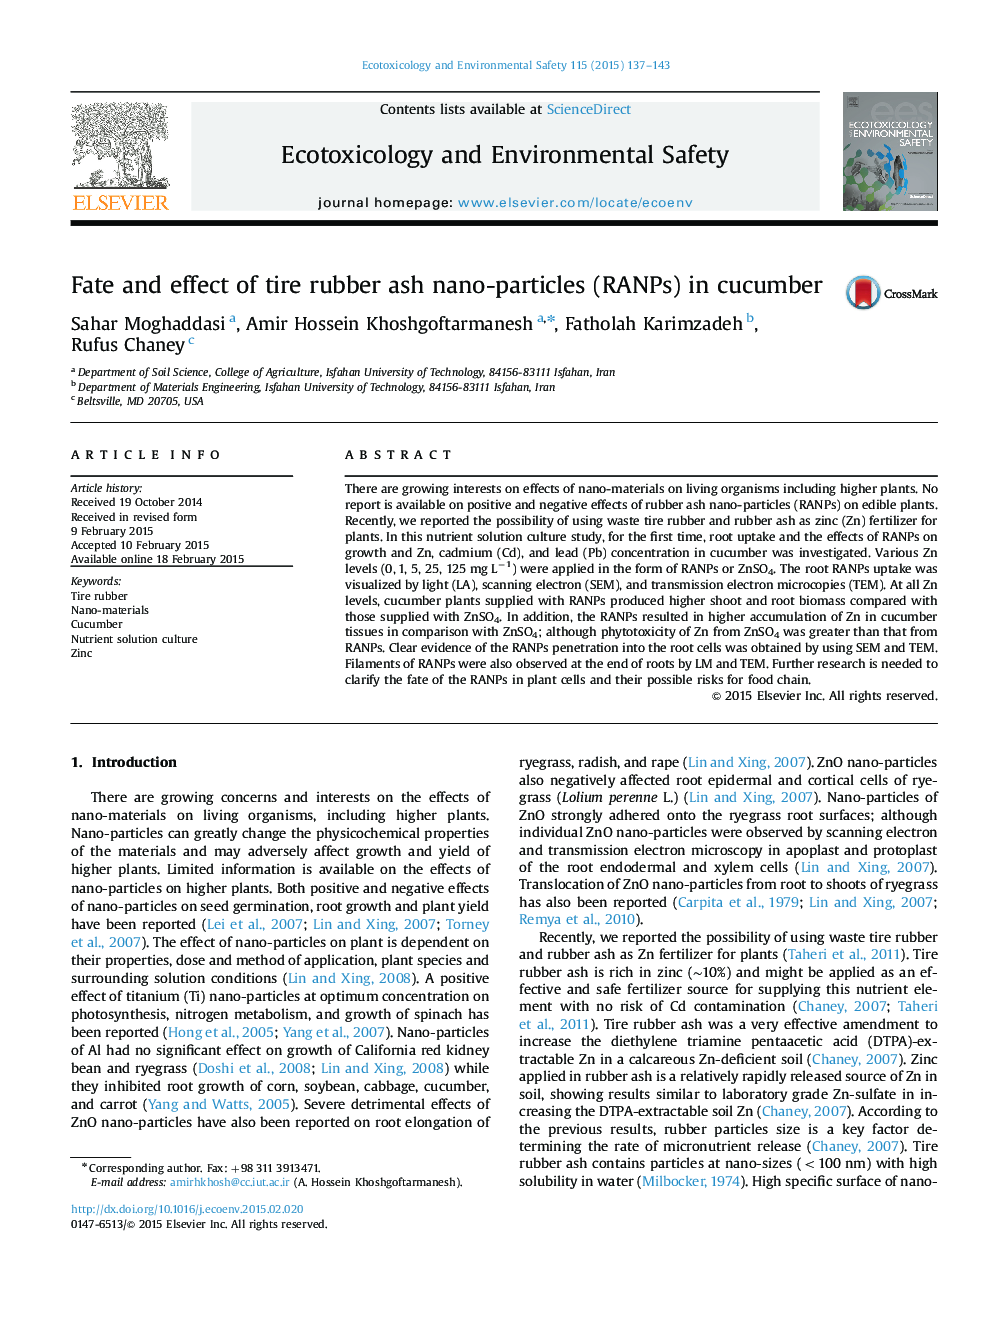 Fate and effect of tire rubber ash nano-particles (RANPs) in cucumber